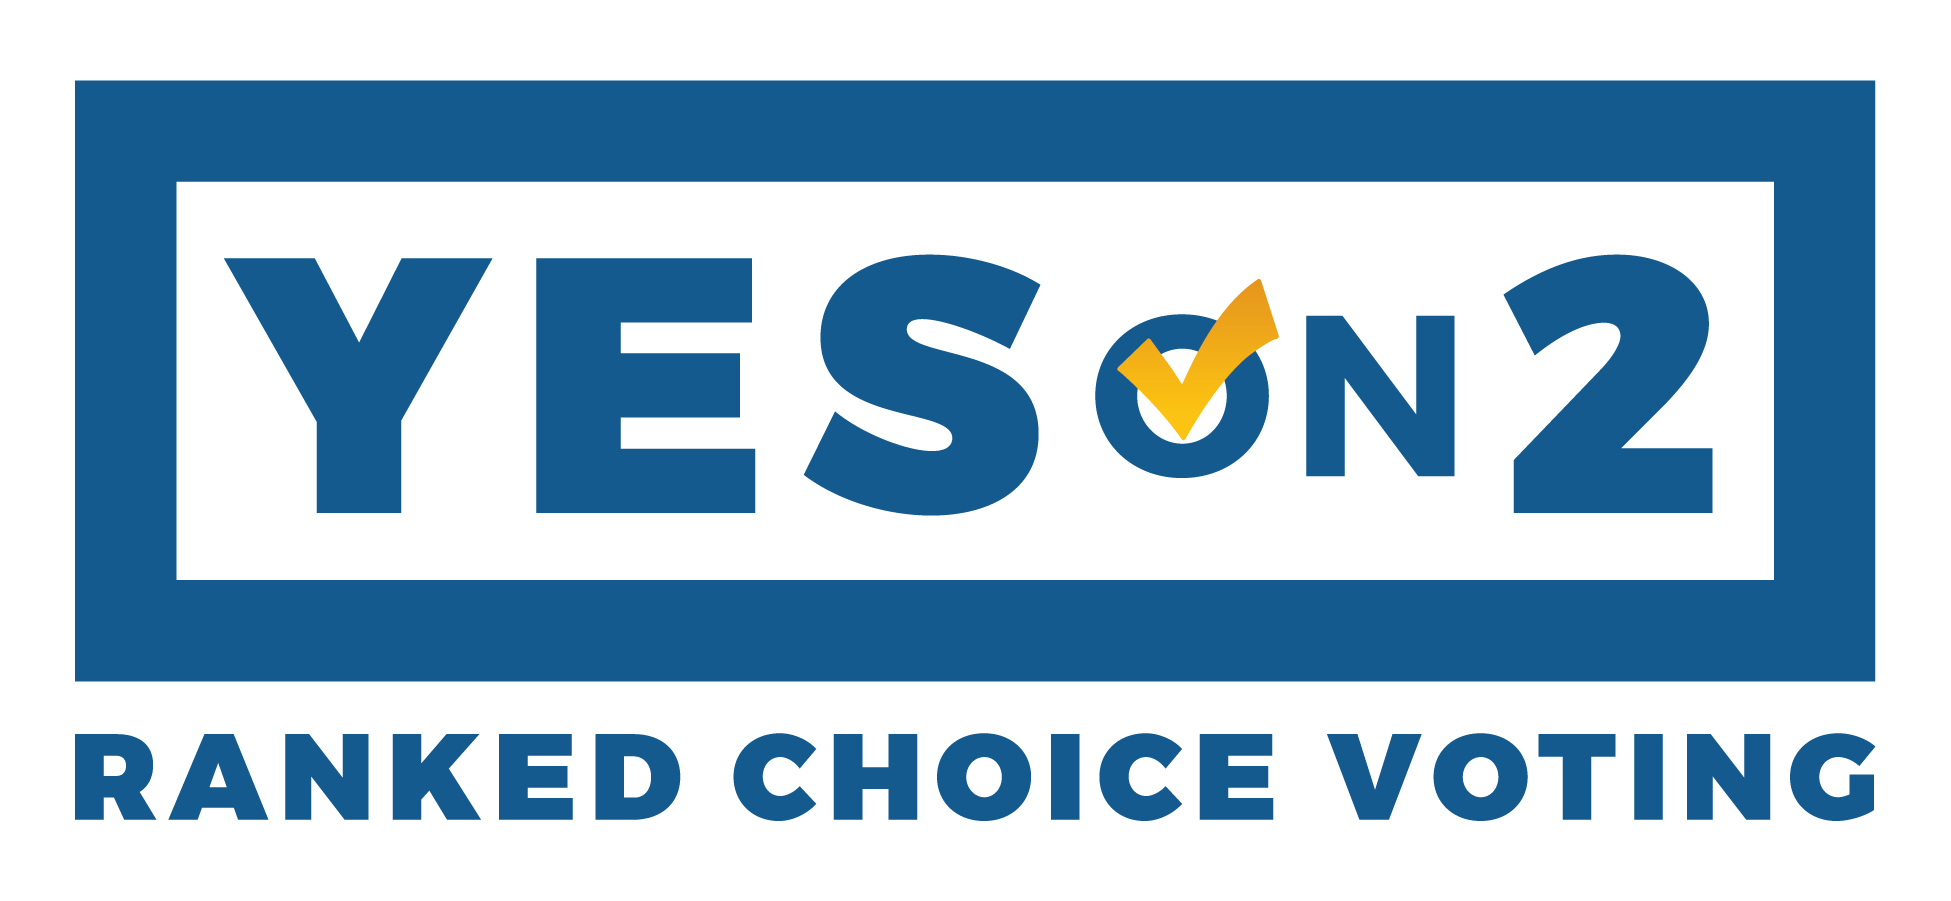 Logo of the "Yes on 2" campaign